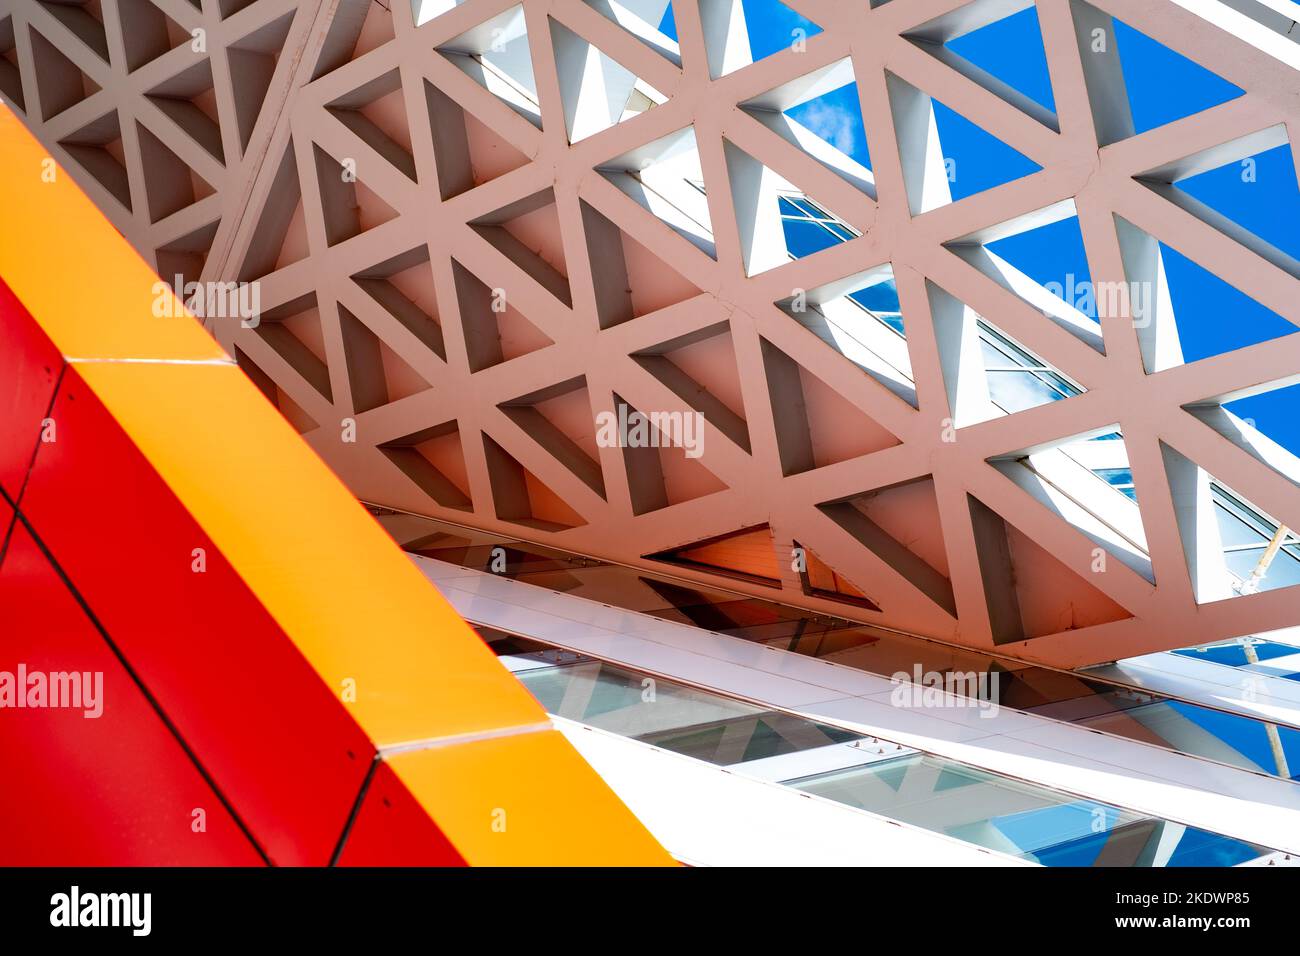 Architectural forms, Canberra, ACT, Australia Stock Photo